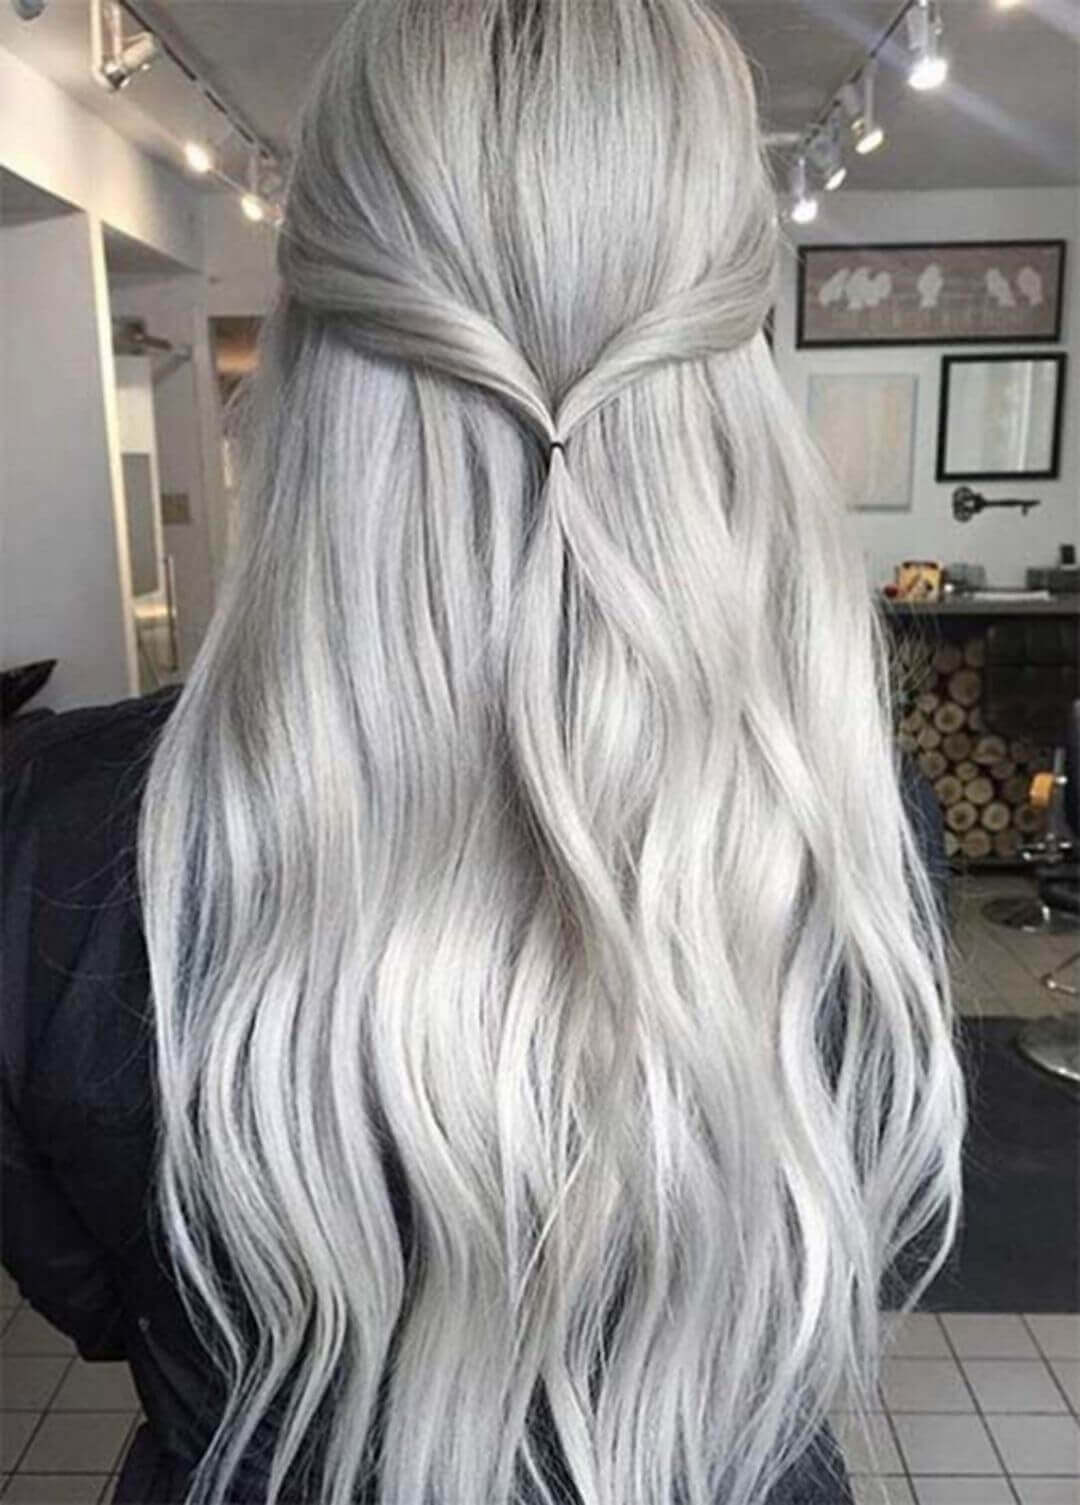 A woman's long, flowing mane featuring icy silver and subtle gray highlights, styled with a simple half-up twist, cascading in loose waves.